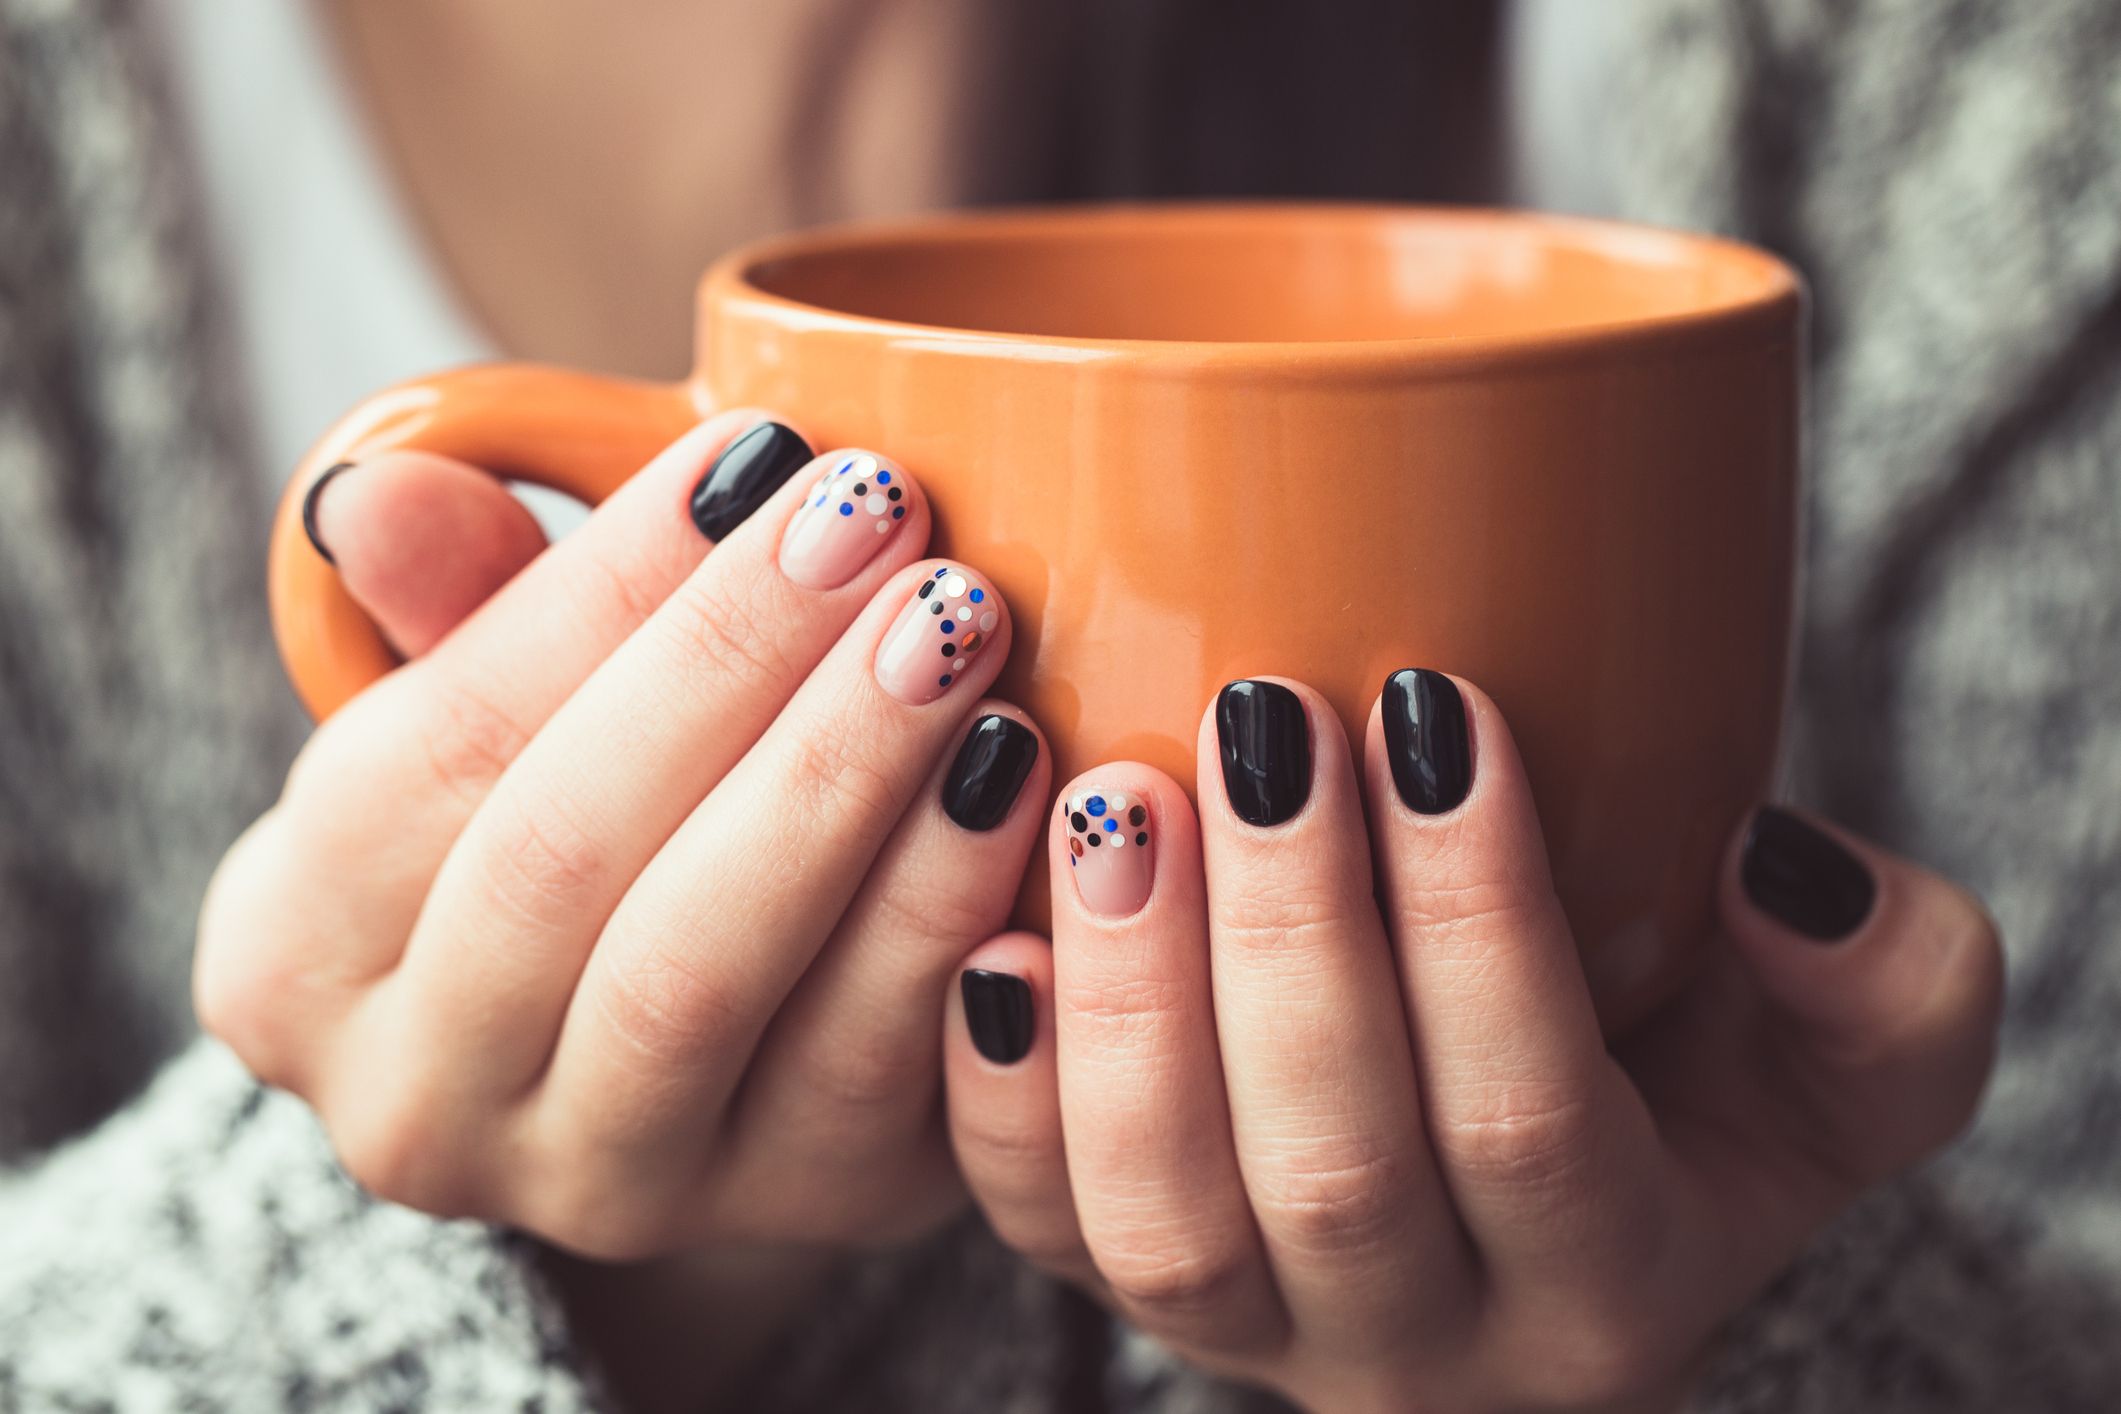 3. "November Nail Trends: Colors and Designs to Try" - wide 4